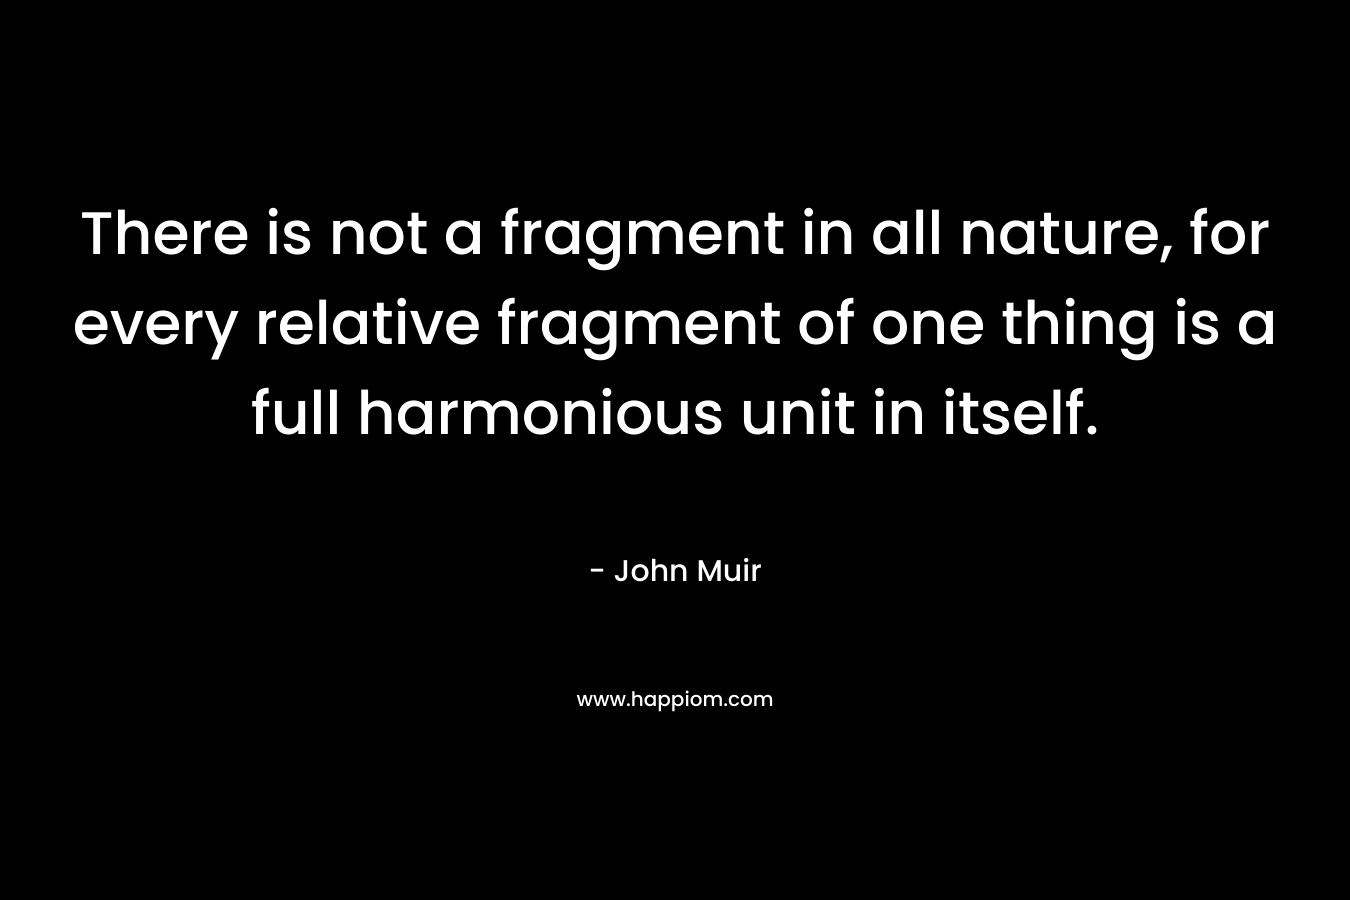 There is not a fragment in all nature, for every relative fragment of one thing is a full harmonious unit in itself.